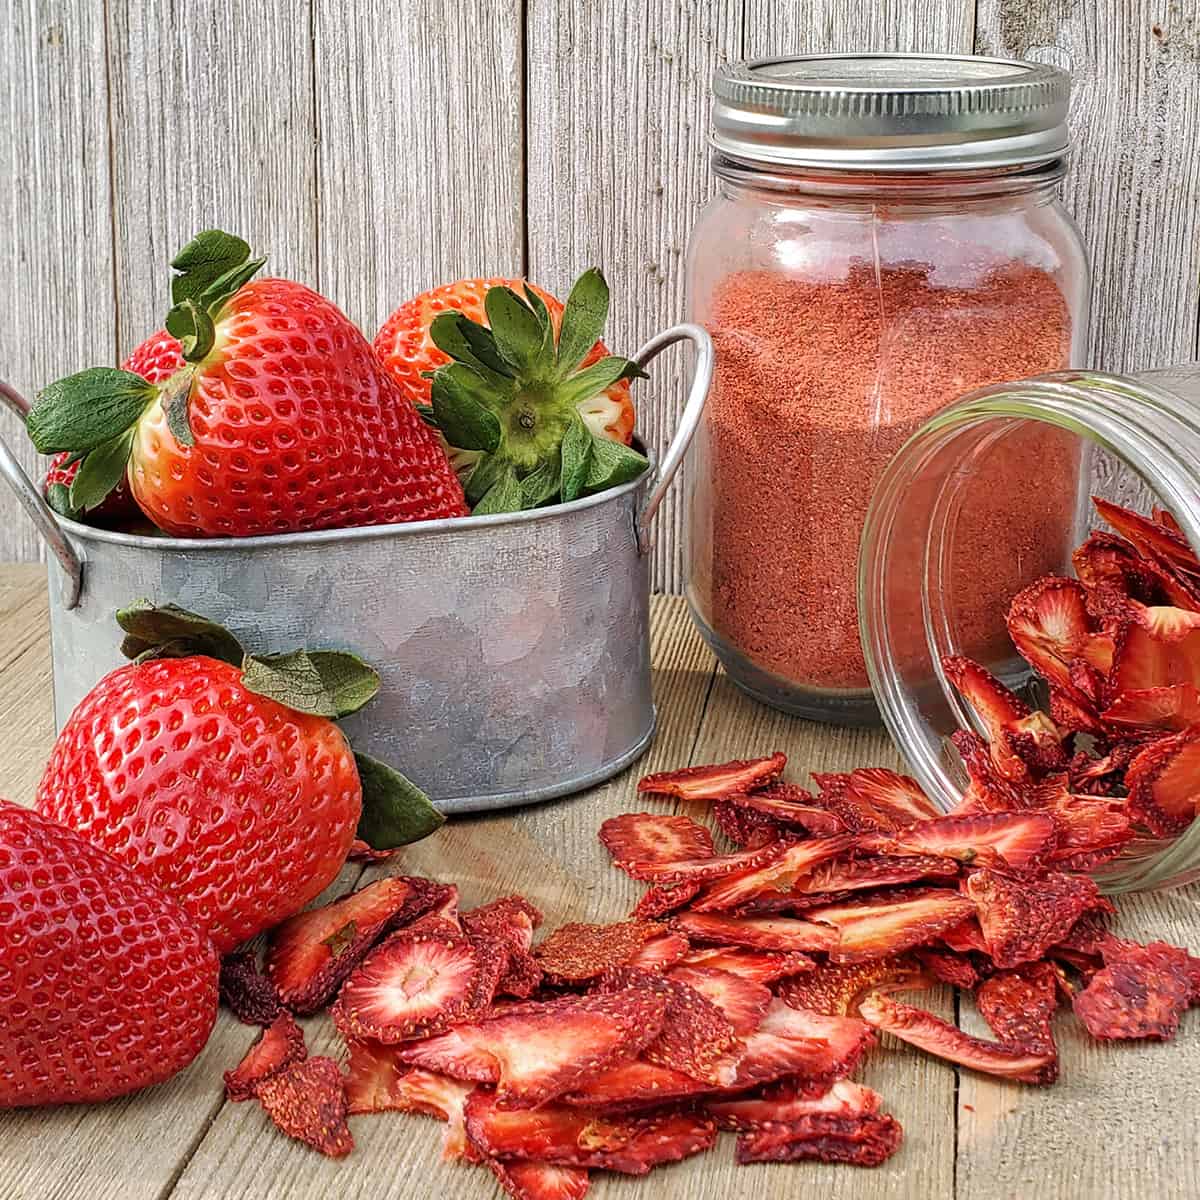 Fresh strawberries, dried strawberries and strawberry powder in containers on a wooden table